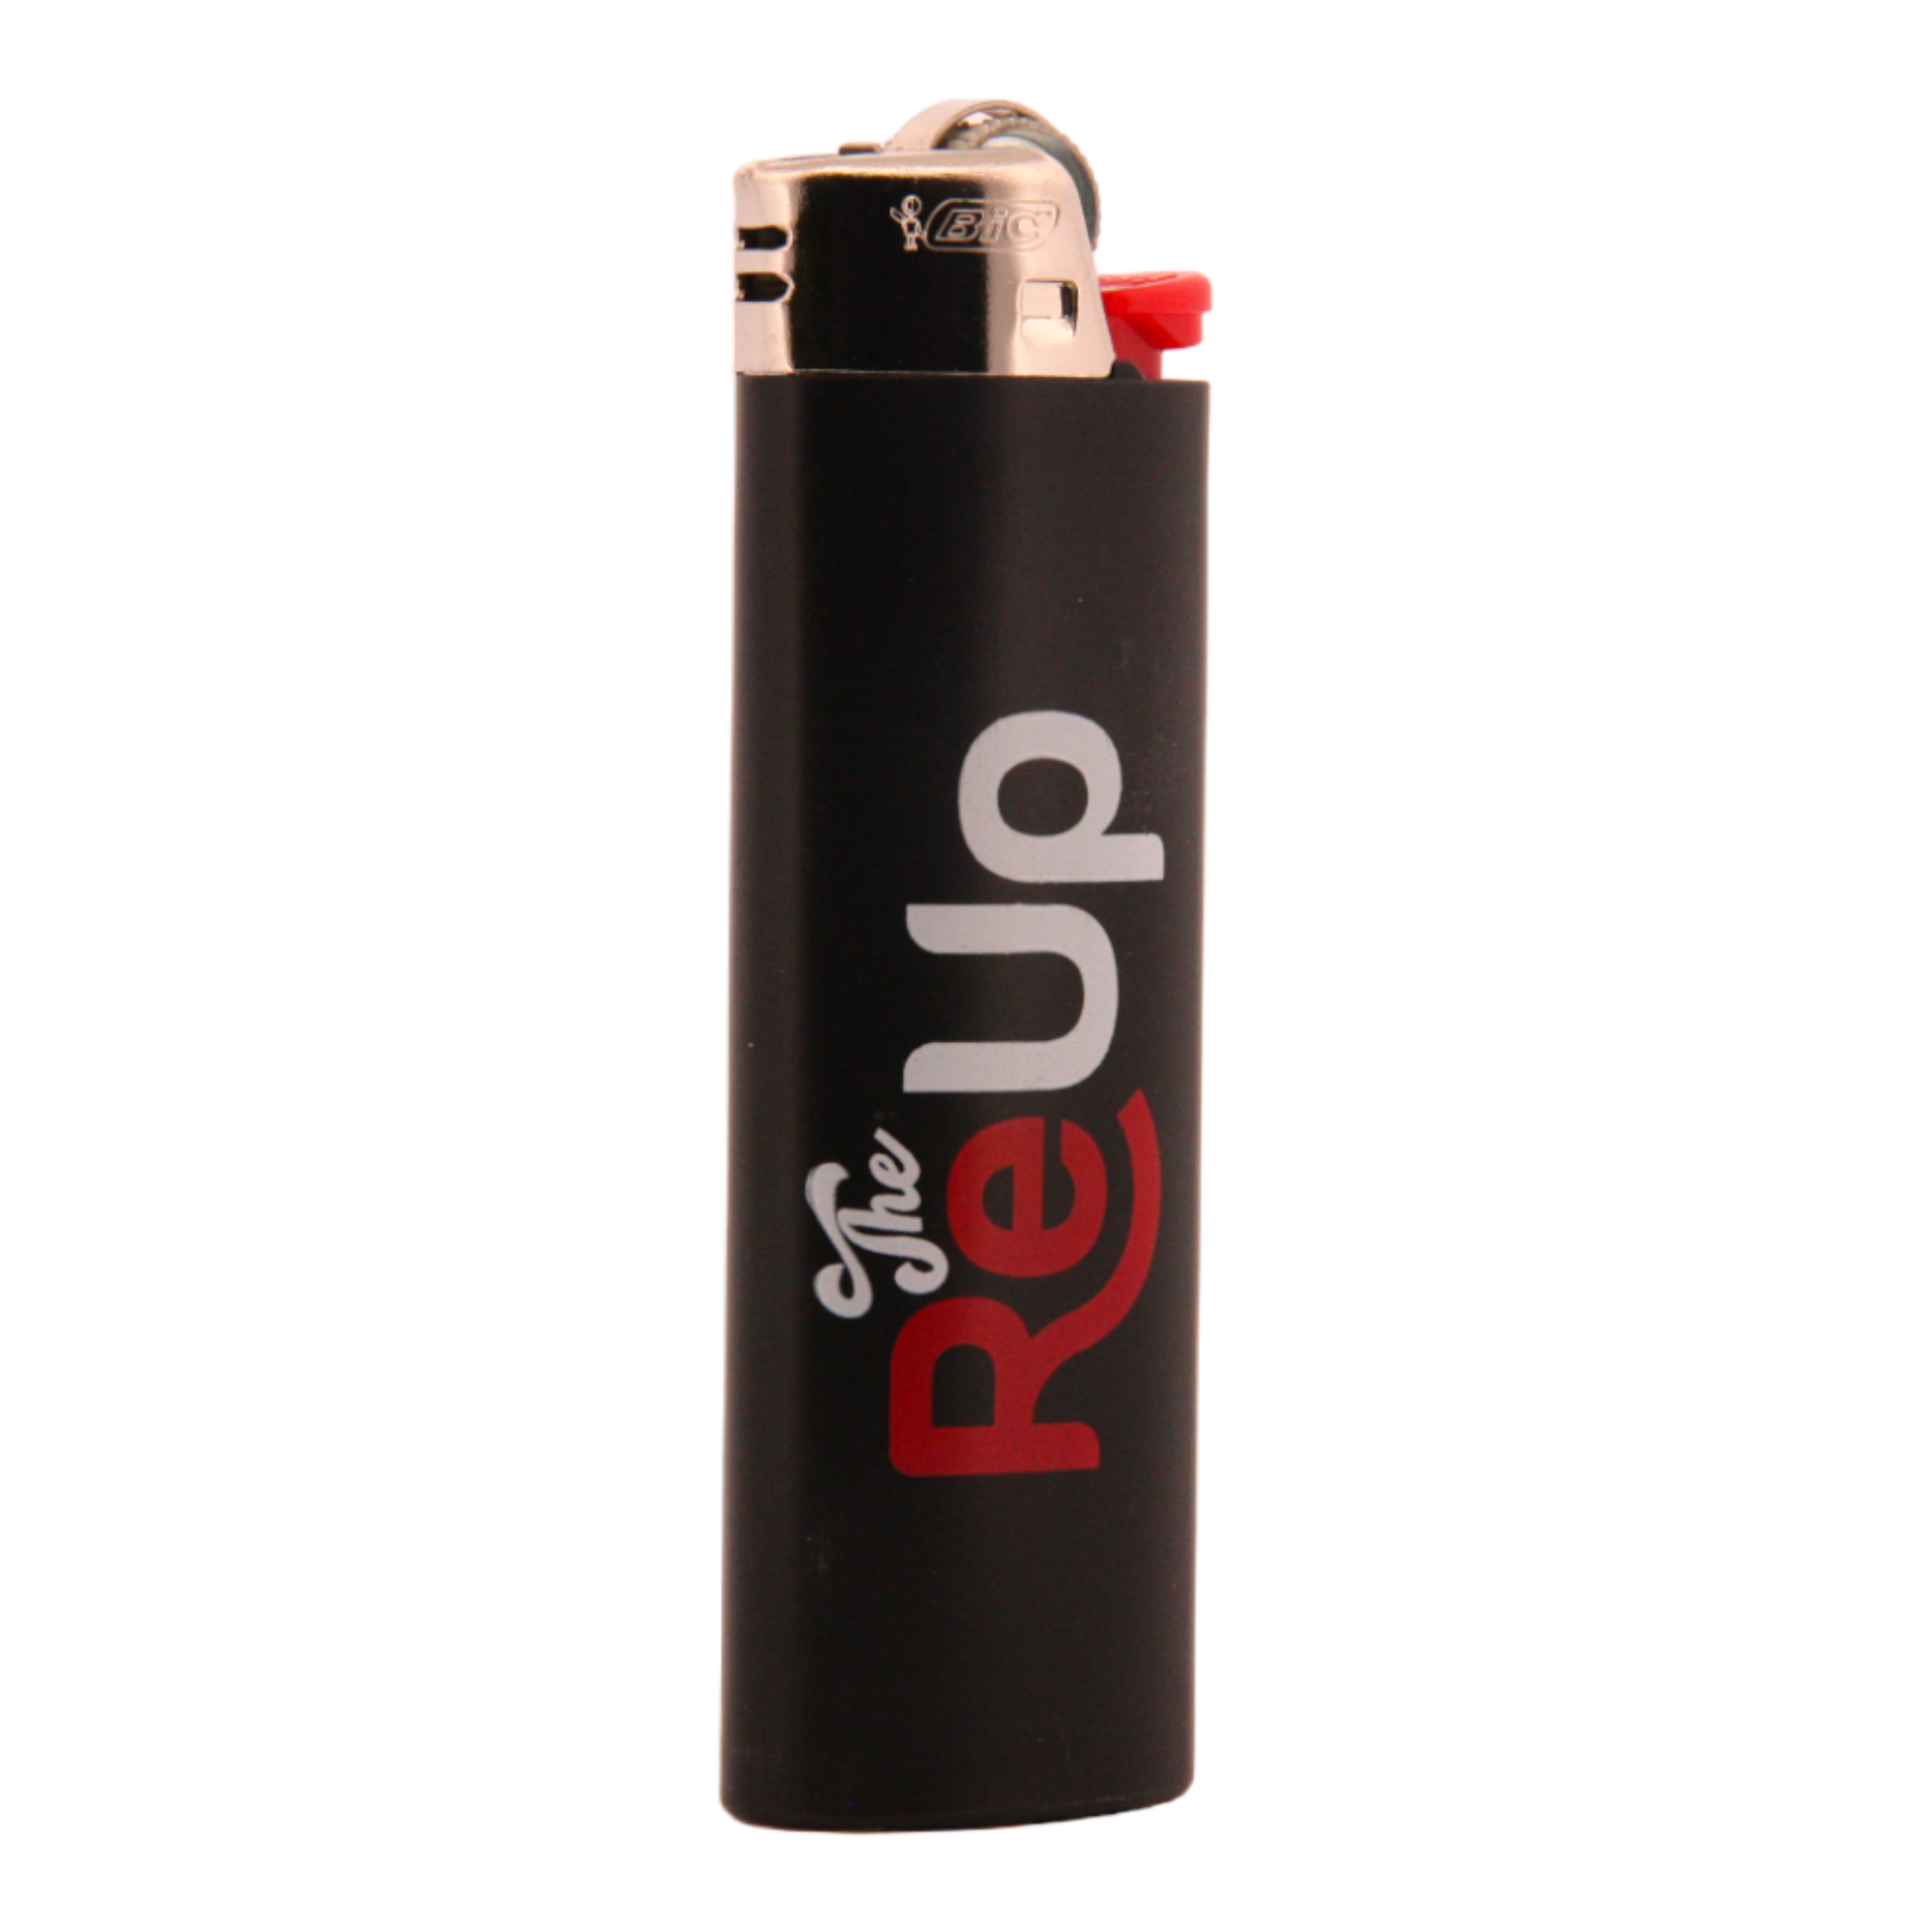 The Re Up Classic Bic Lighter